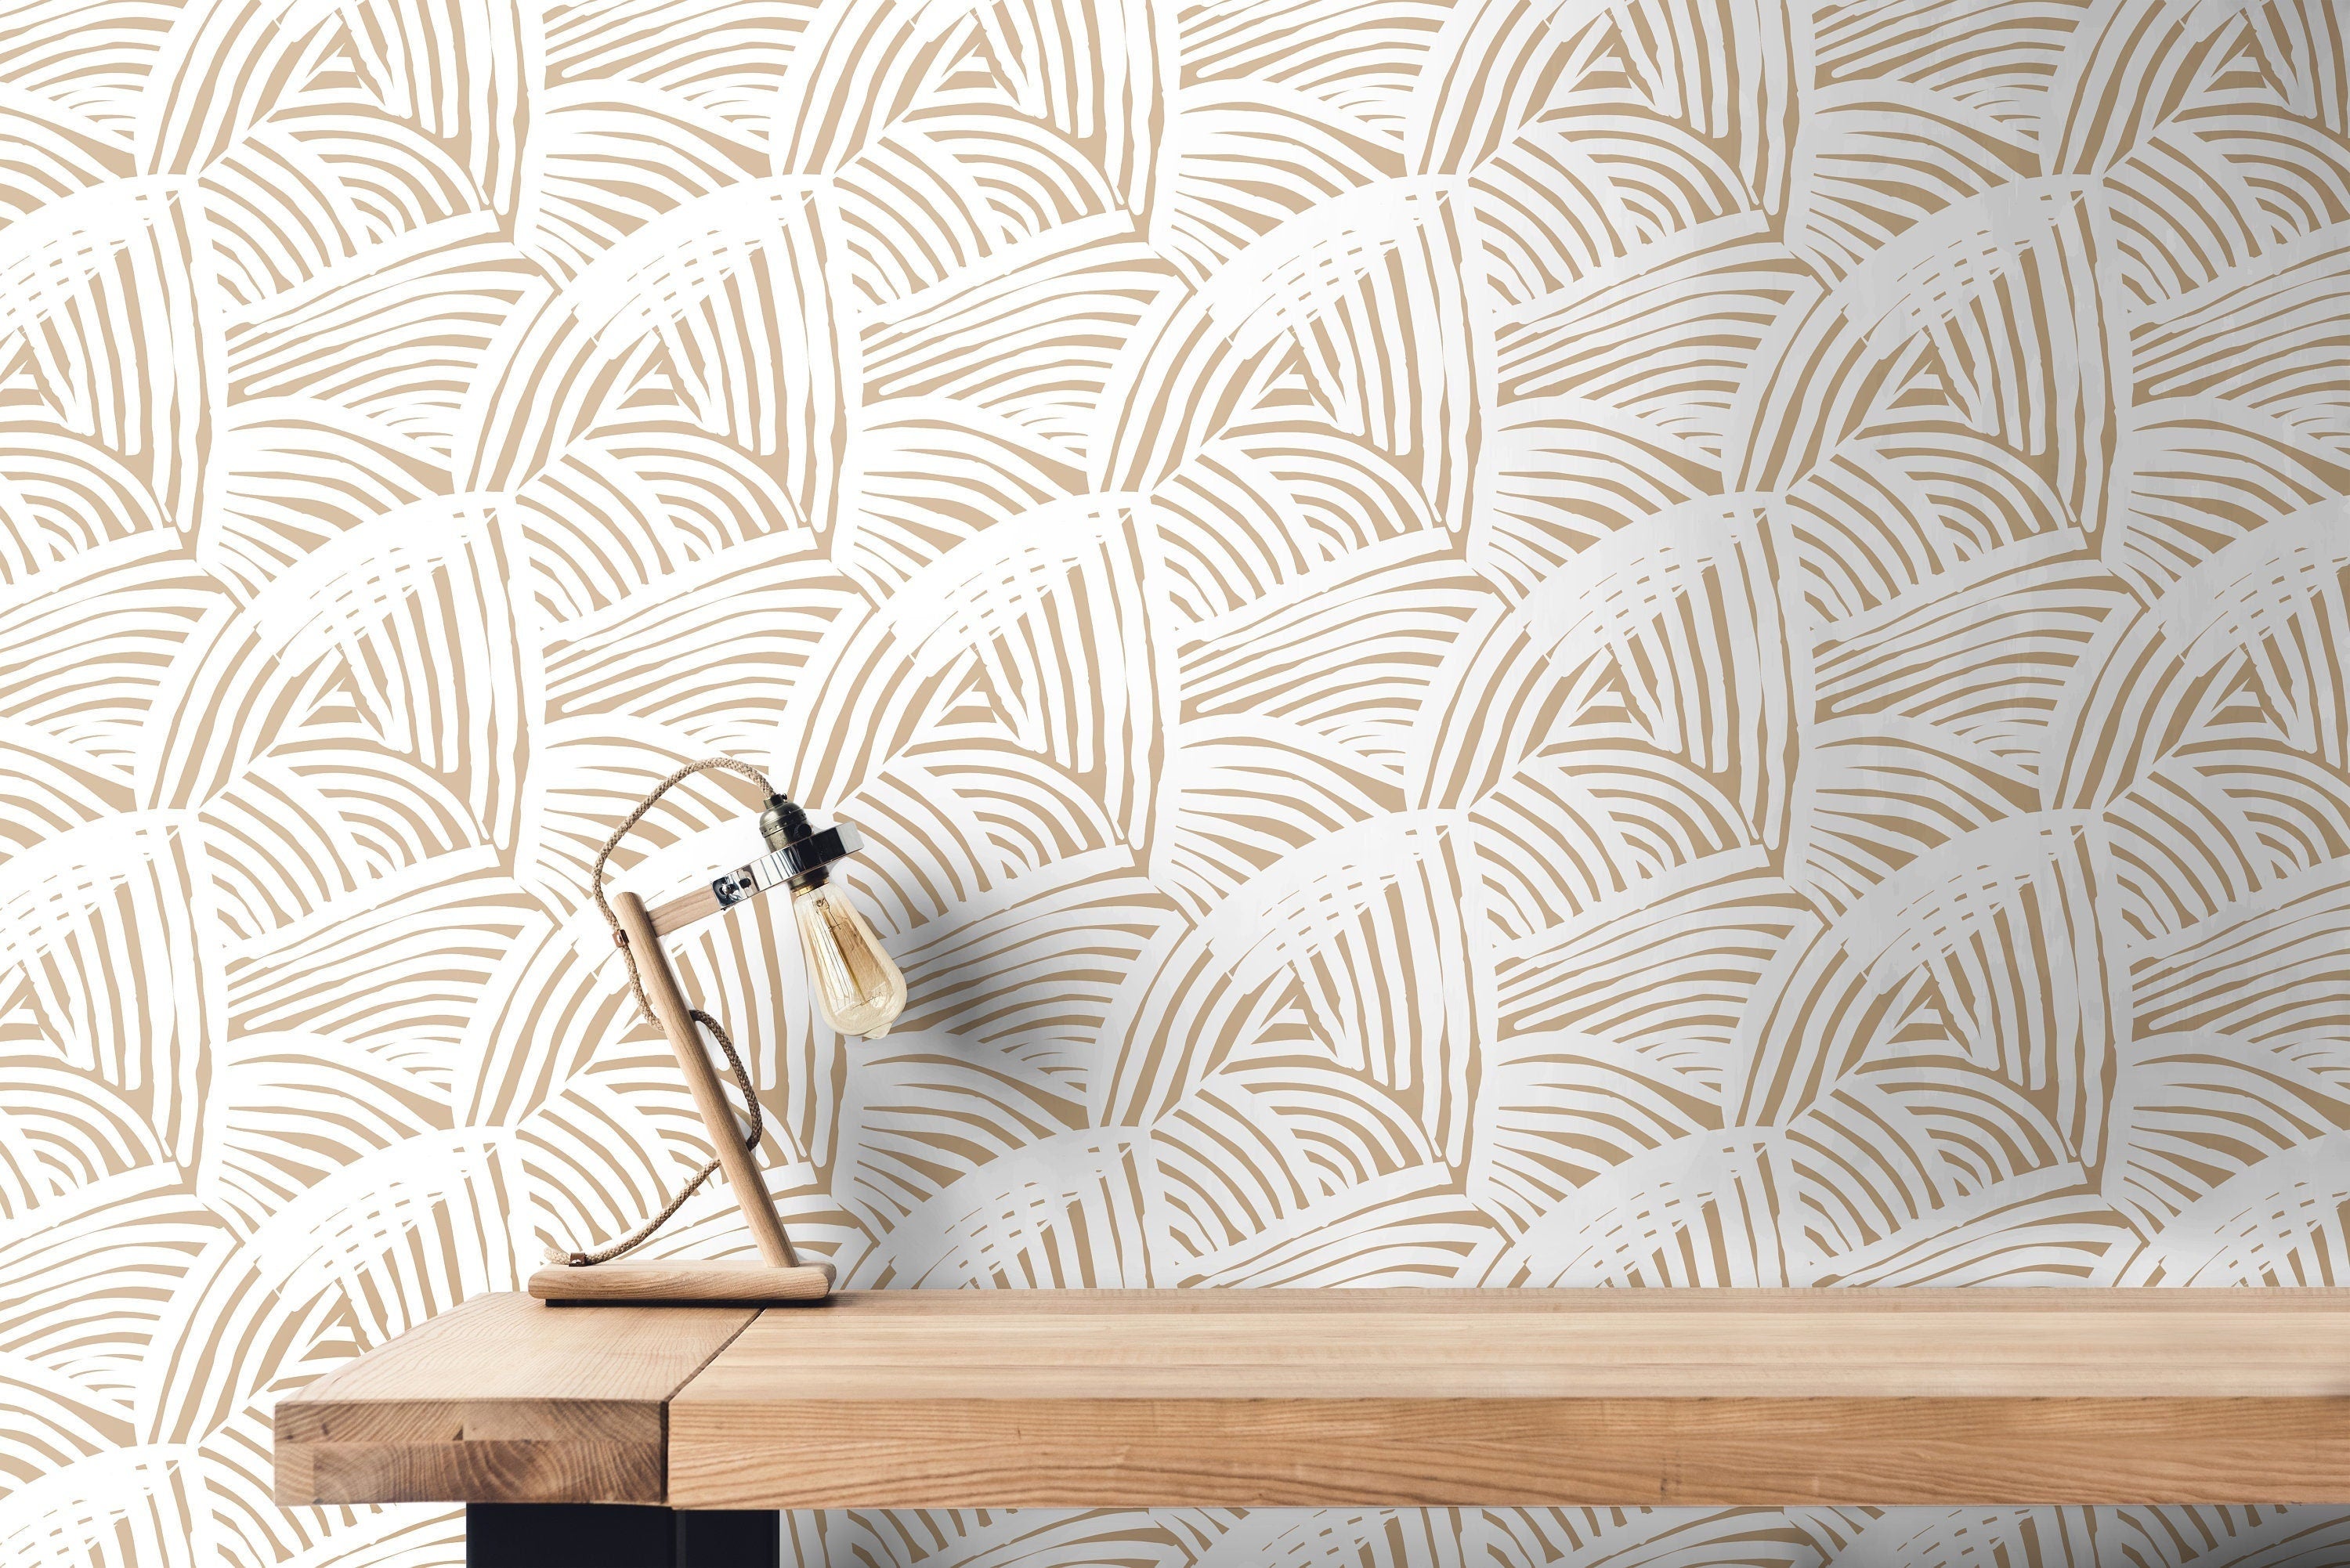 Removable Wallpaper Tan And White Modern Wallpaper | Peel And Stick Wallpaper | Adhesive Wallpaper | Wall Paper Peel Stick Wall Mural 3526 - JamesAndColors